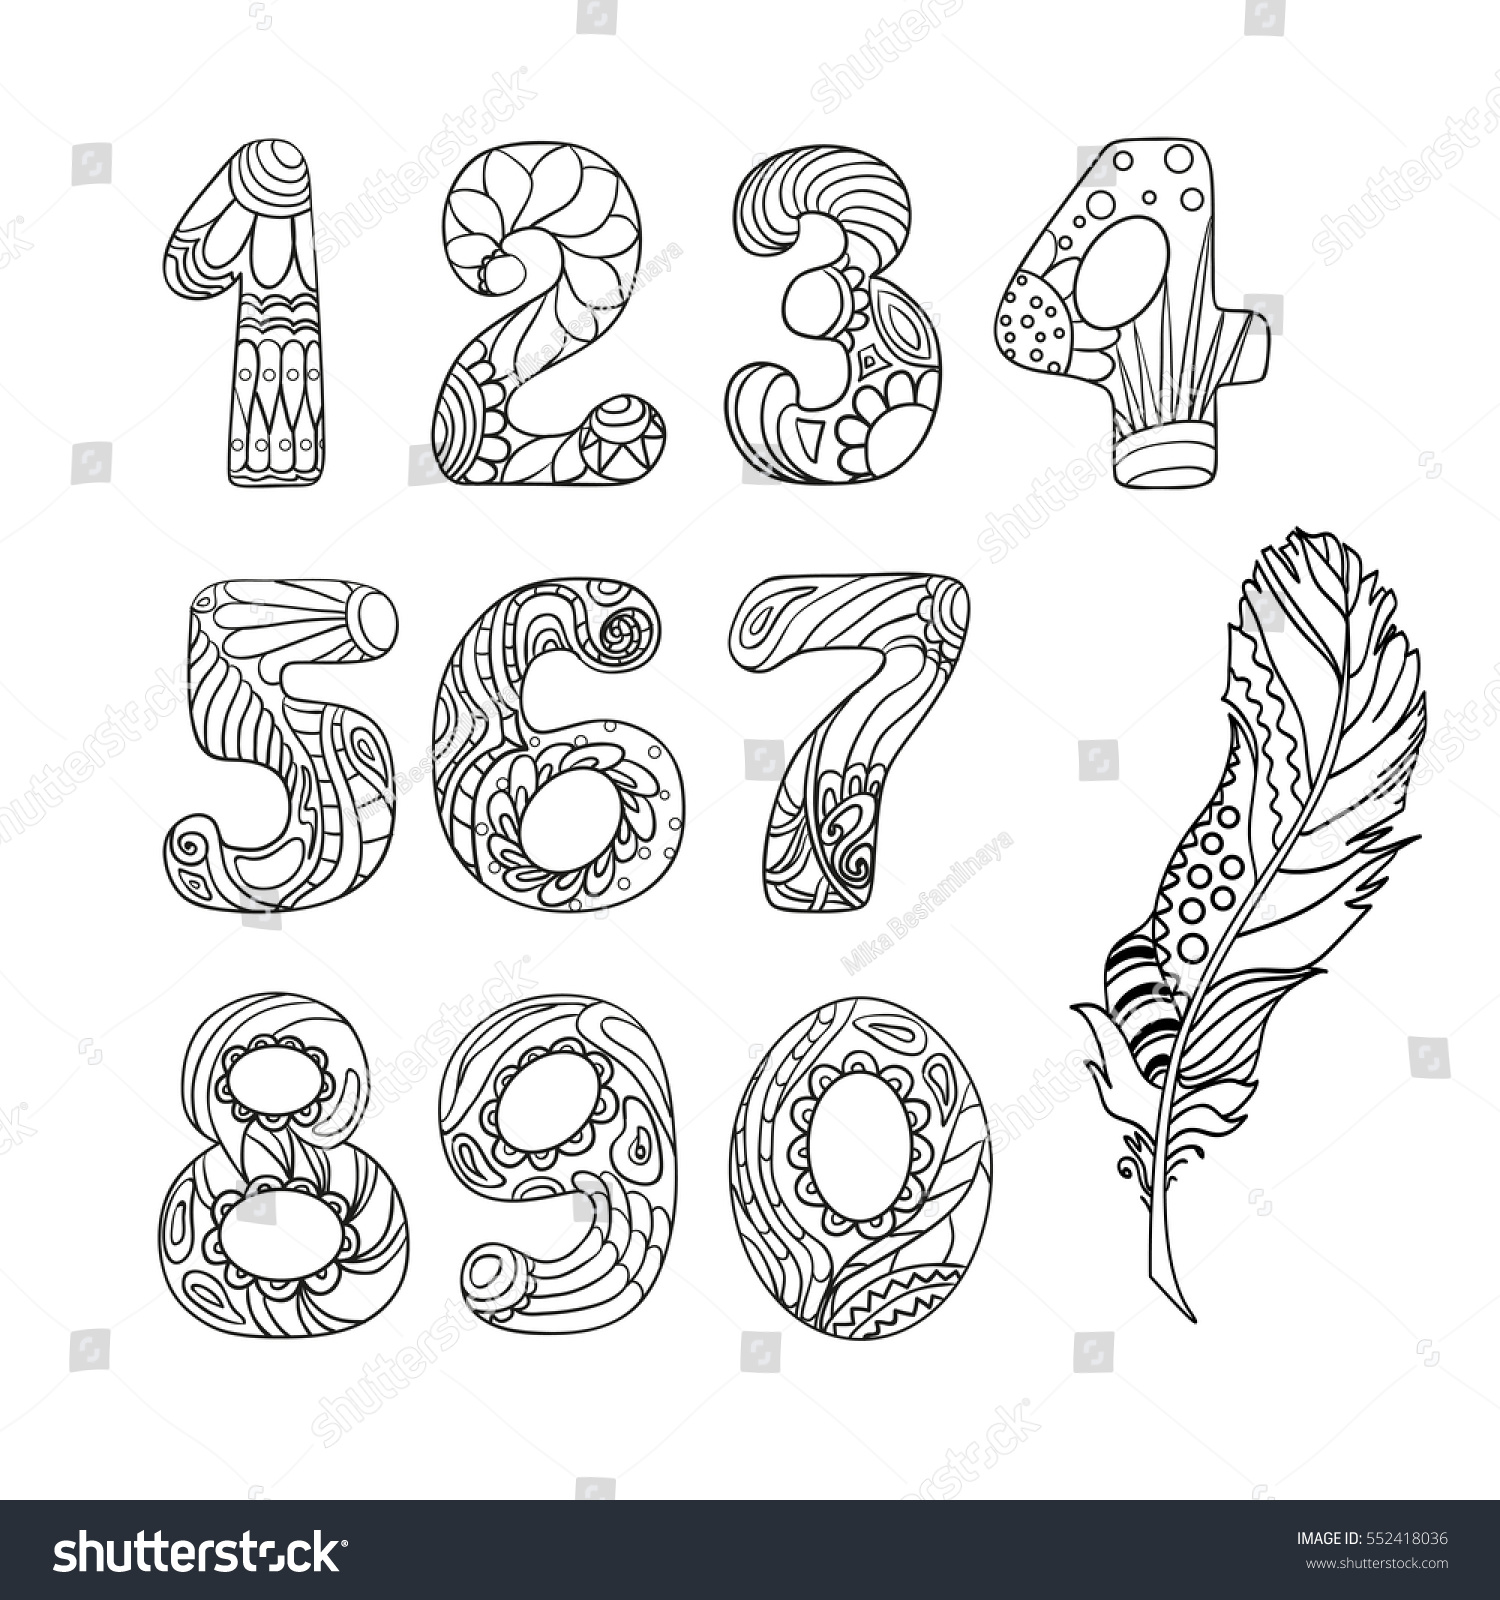 SVG of Numbers. Set. Alphabet. Zentangle. Hand drawn numbers with feather on isolation background. Design for spiritual relaxation for adults. Line art creation. Black and white illustration for coloring. svg